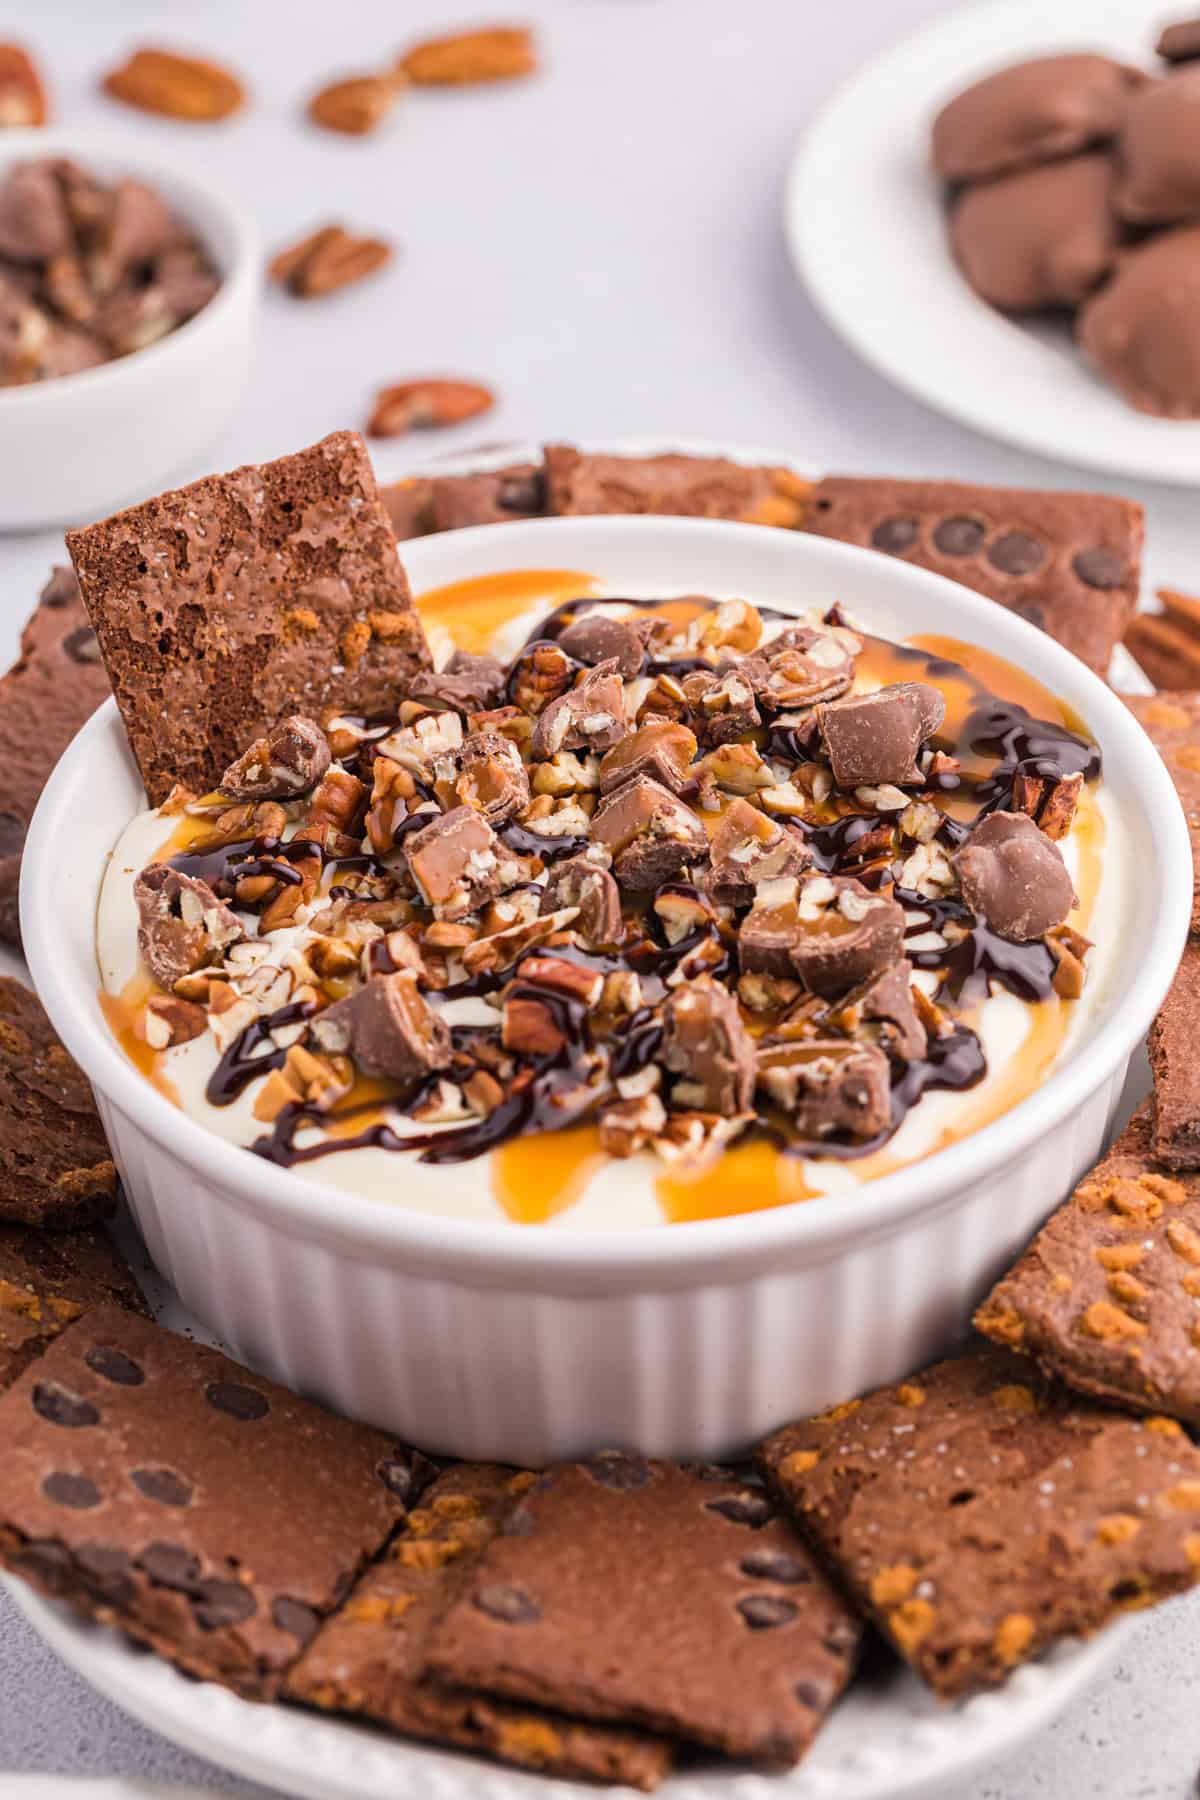 No-bake turtle cheesecake dip in a white serving bowl topped with caramel, pecans, chopped turtle candies, and served with brownie brittle for dipping.